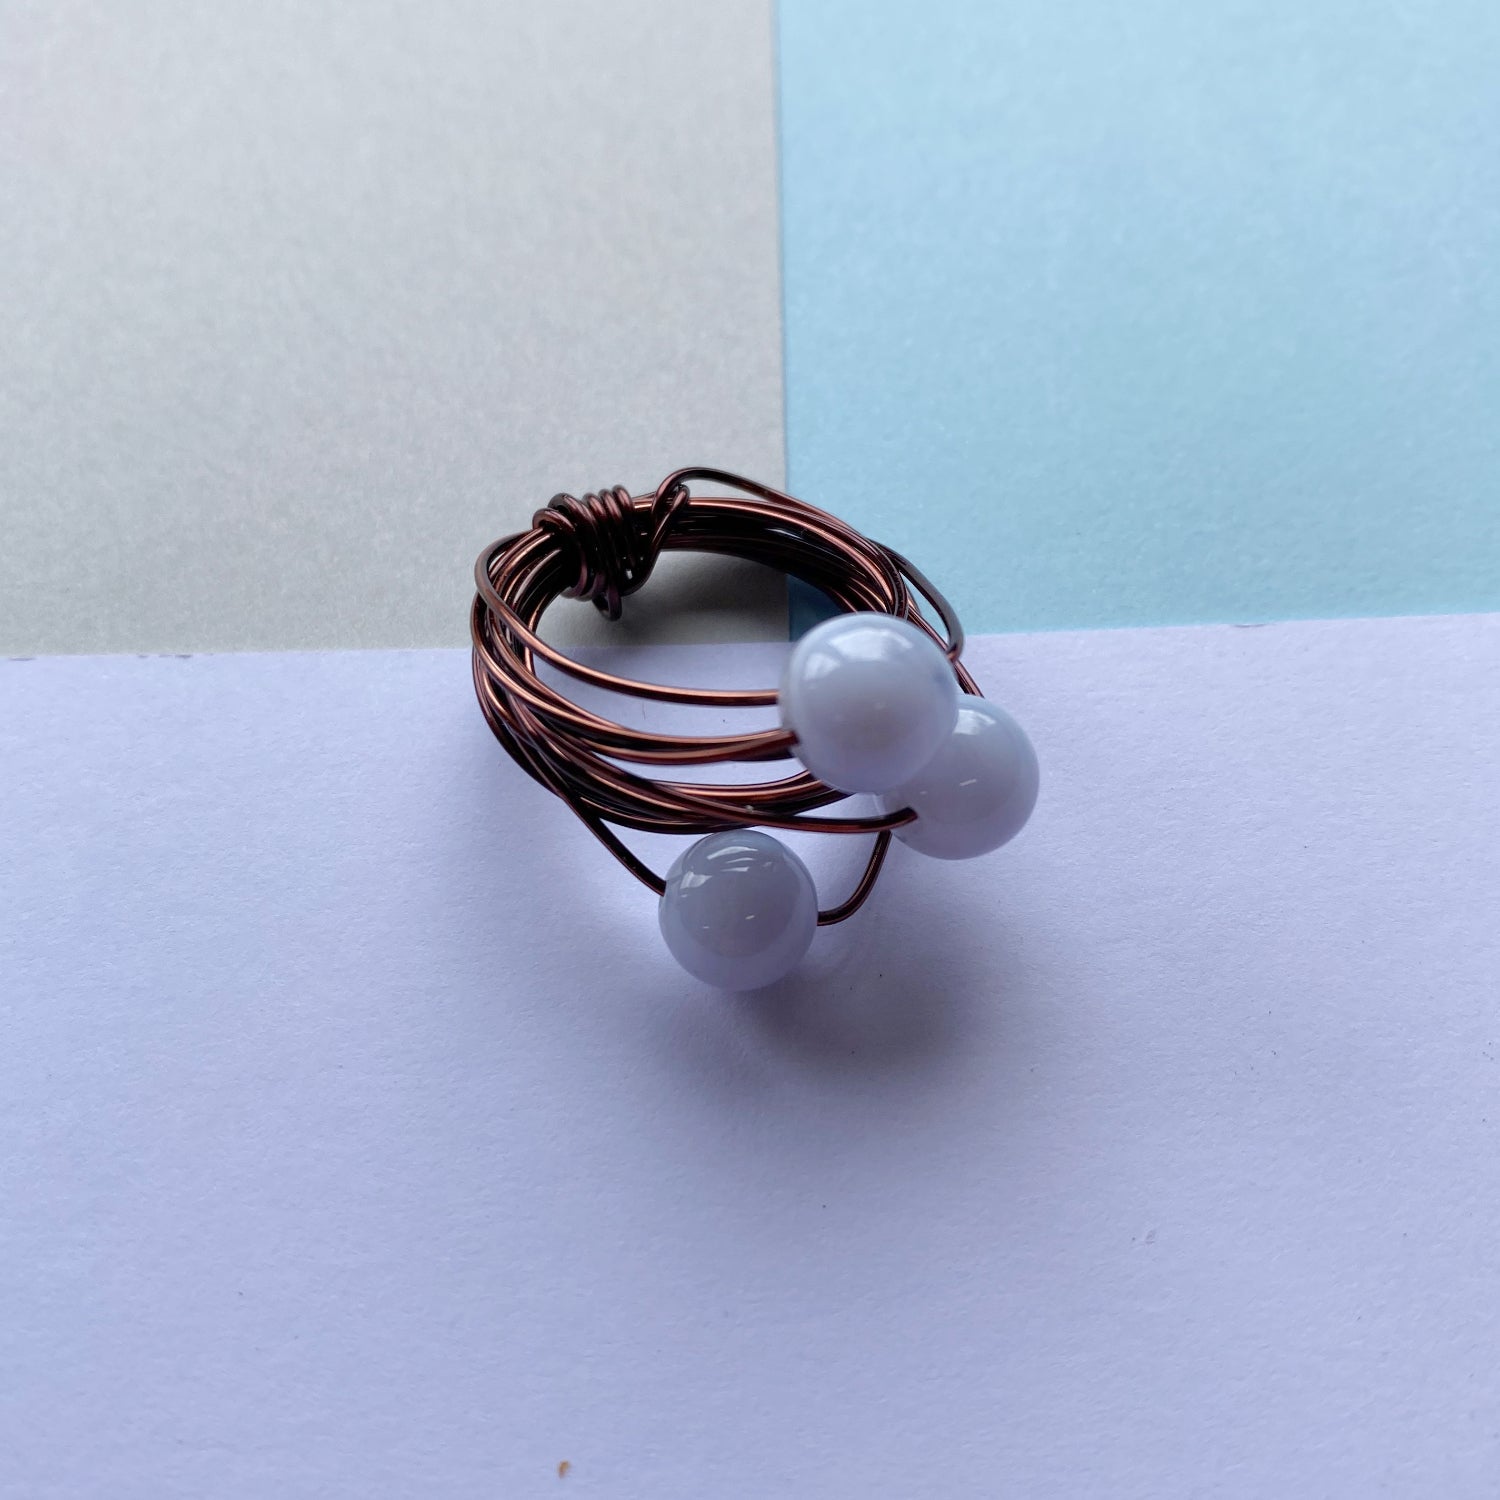 Wire Wrap Rings - silver/neutrals - small (h-o) - The Argentum Design Co